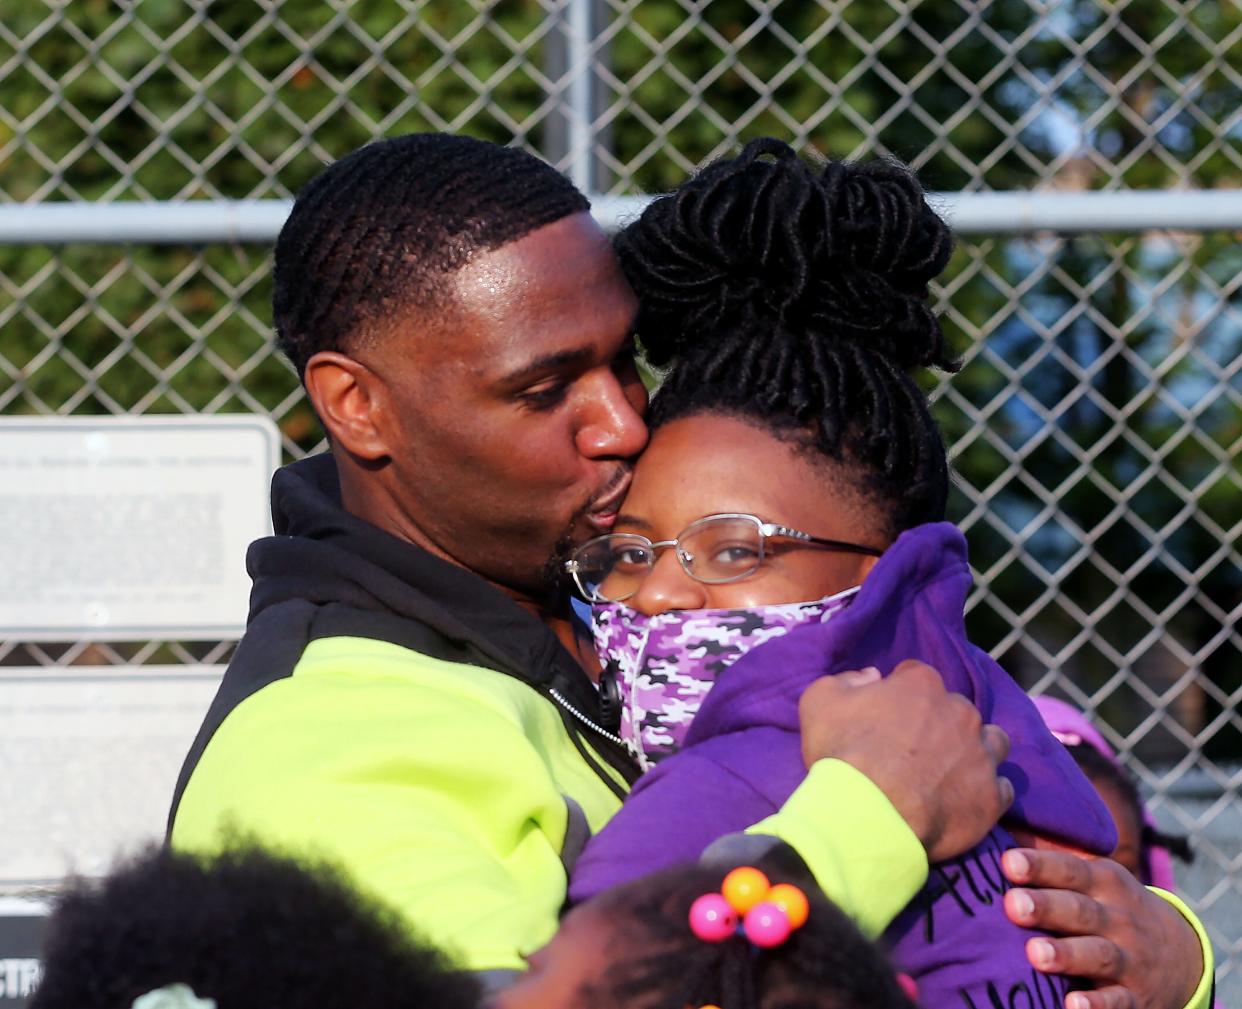 Marlin Dixon, left,  embraces his daughter  Kamariya Dixon, right, on Tuesday, Sept. 22, 2020, after he was released from the John C. Burke Correctional Center. His daughter was 5 months old when he was sentenced to 18 years in prison for the death of Charlie Young Jr.